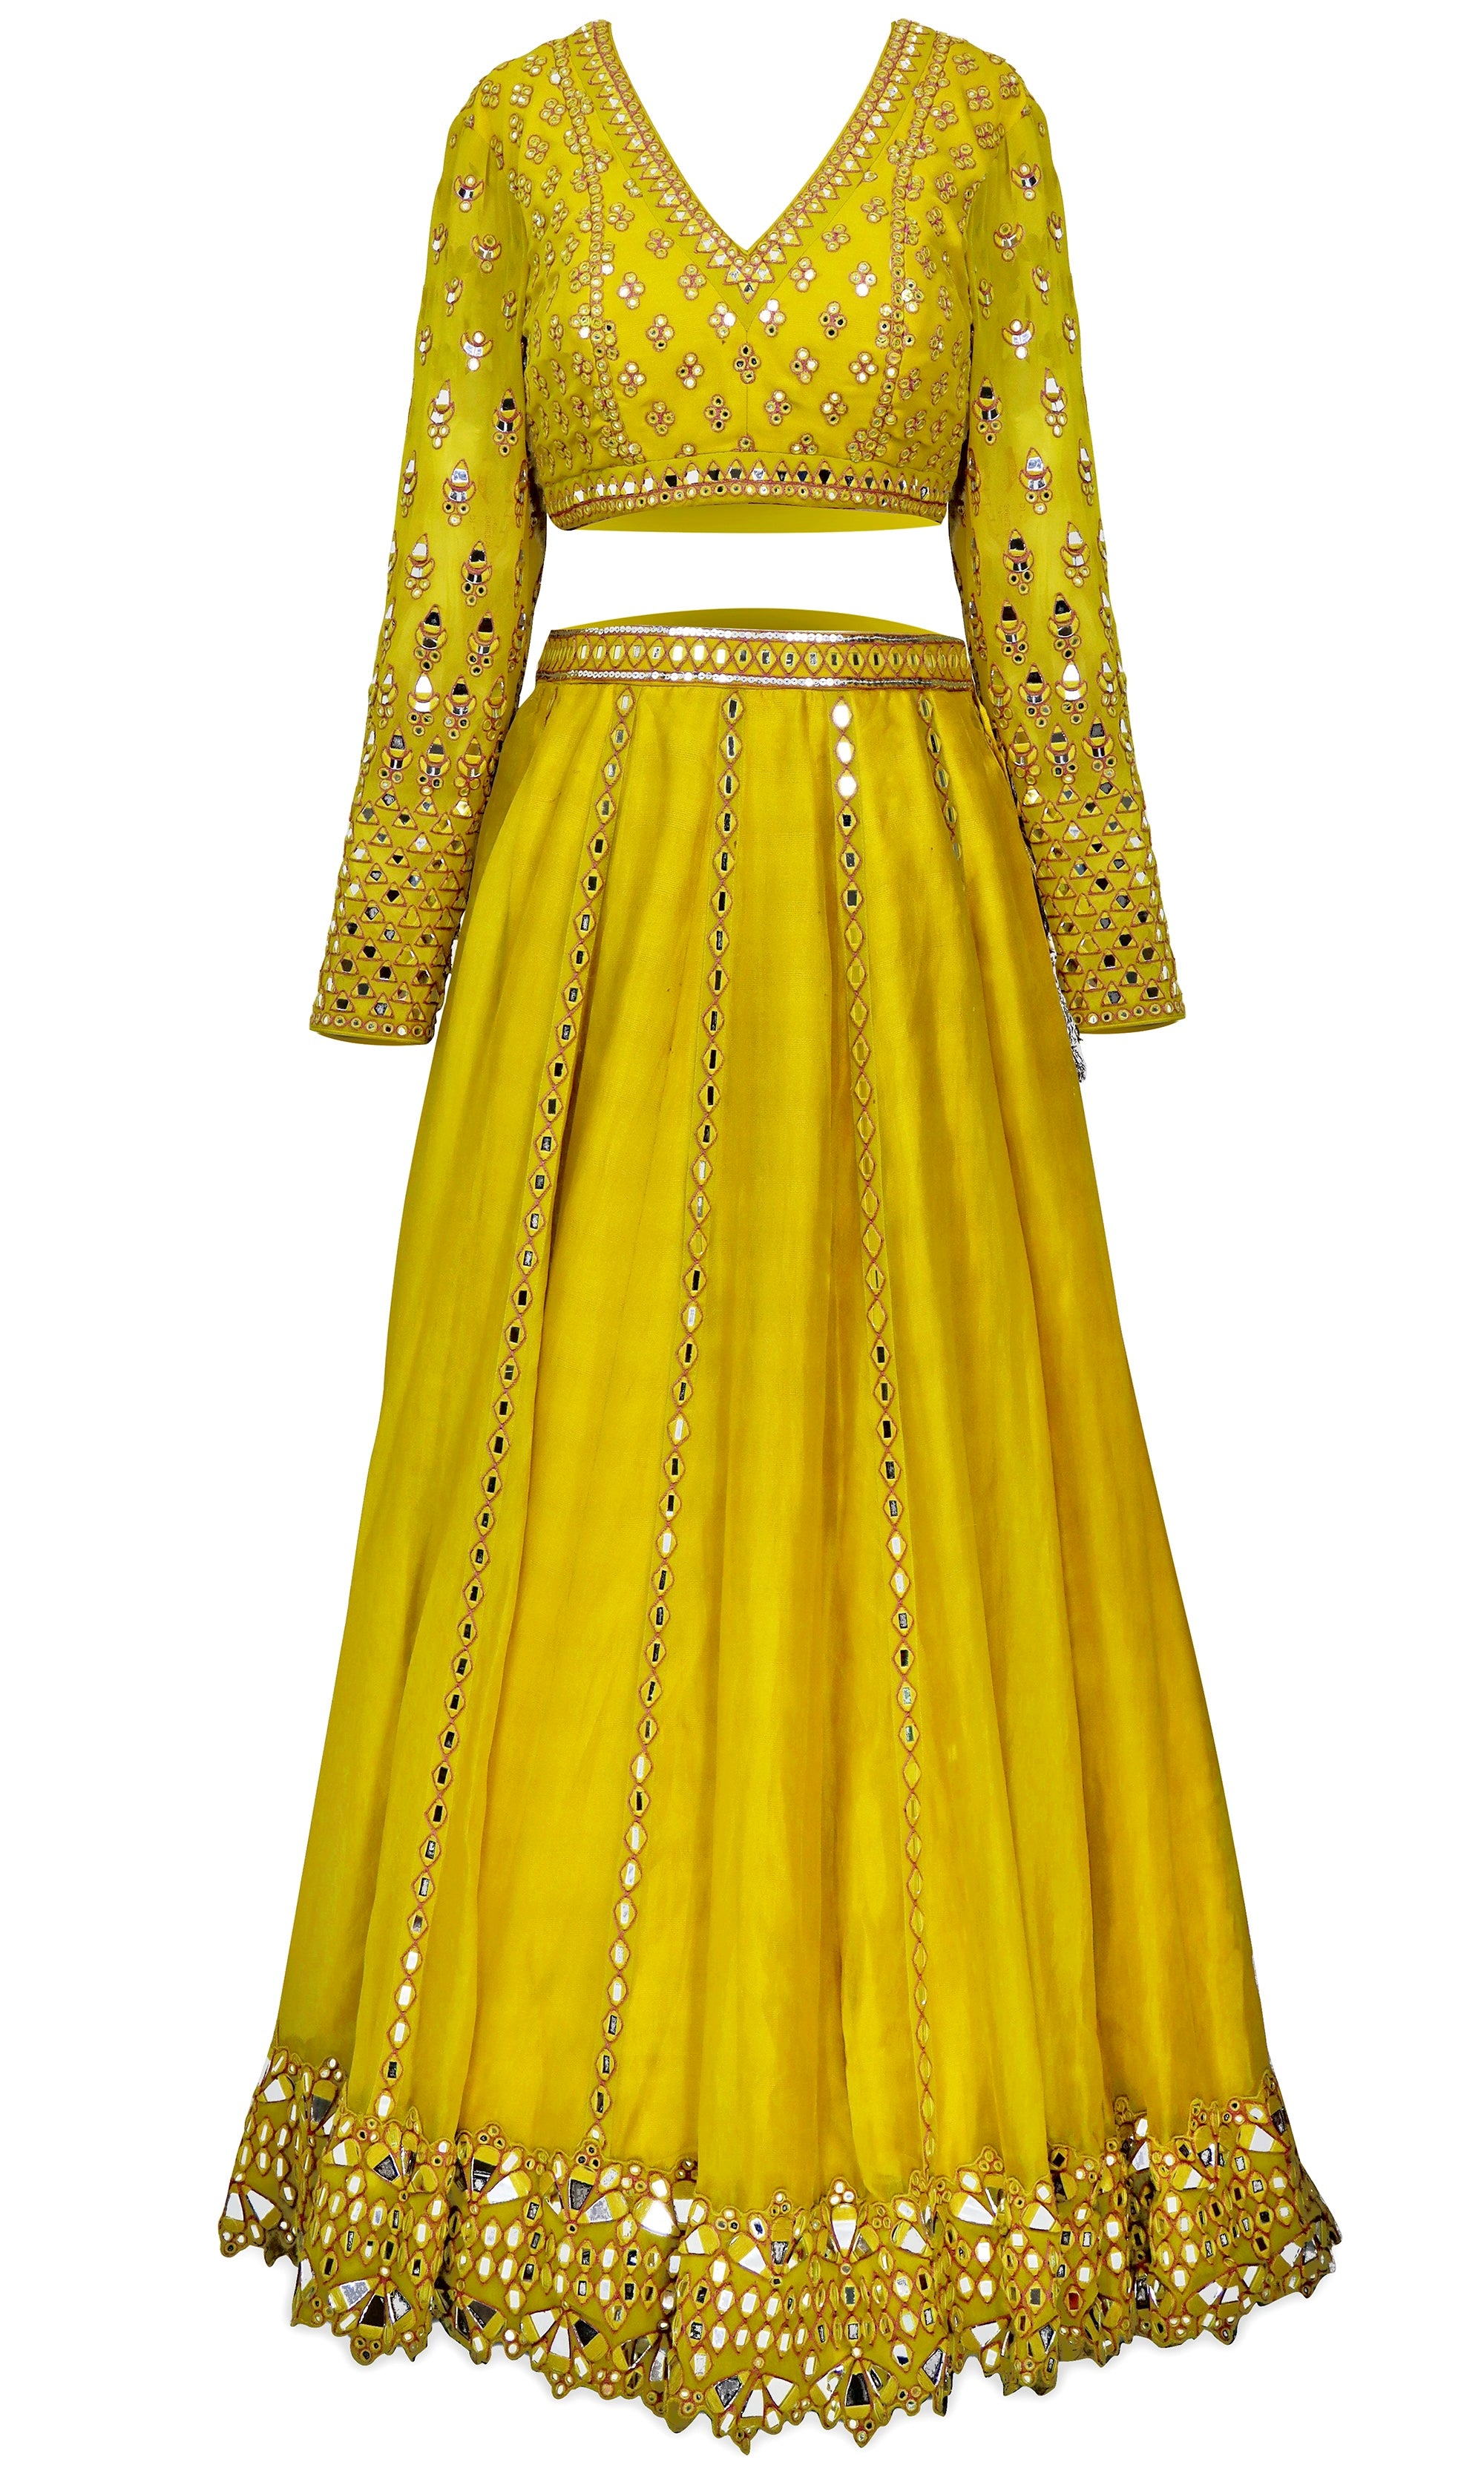 Moss Green/yellow 3 piece lehenga including skirt, blouse,& dupatta with gold stone work by Vani Vats